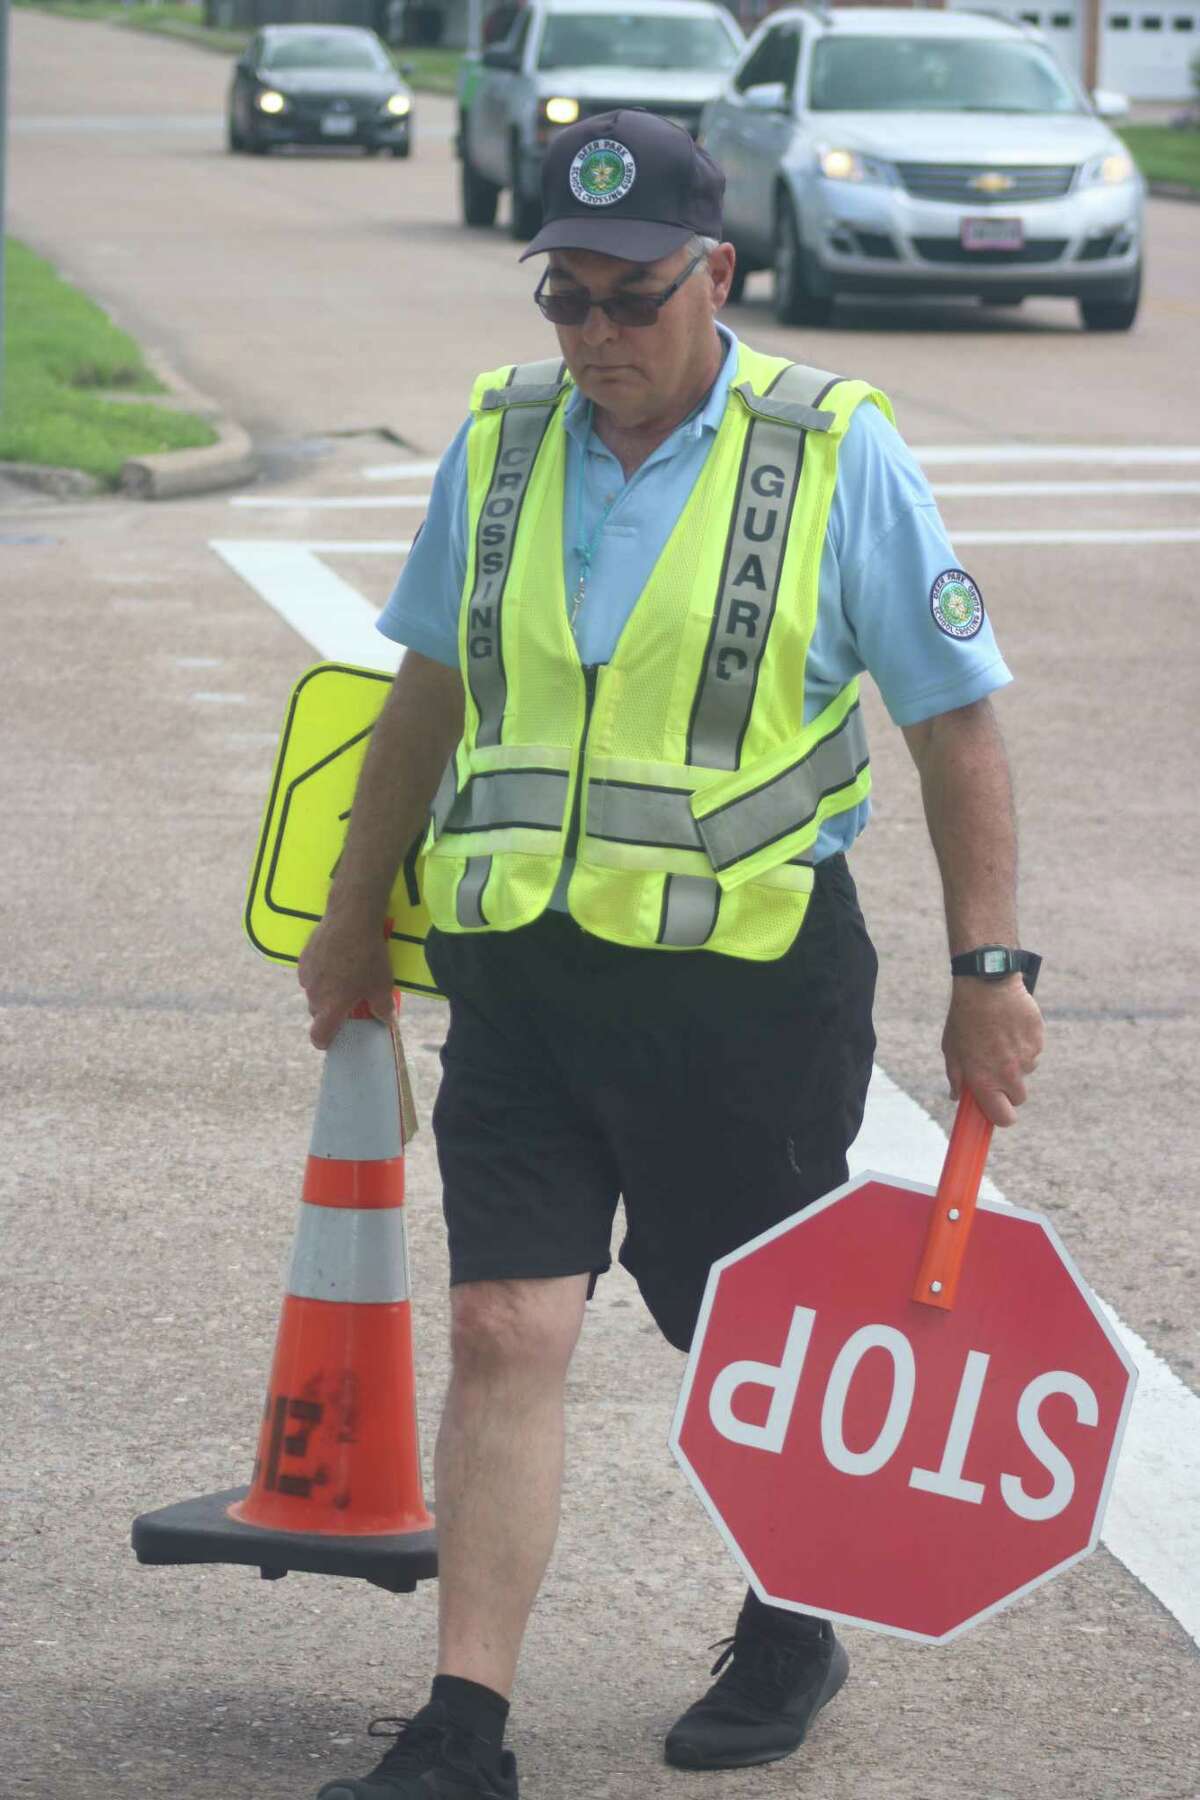 Carrying his necessary equipment, school crossing guard Mike Cheney leaves his Deer Park intersection for the final time of the 2020-21 school year.